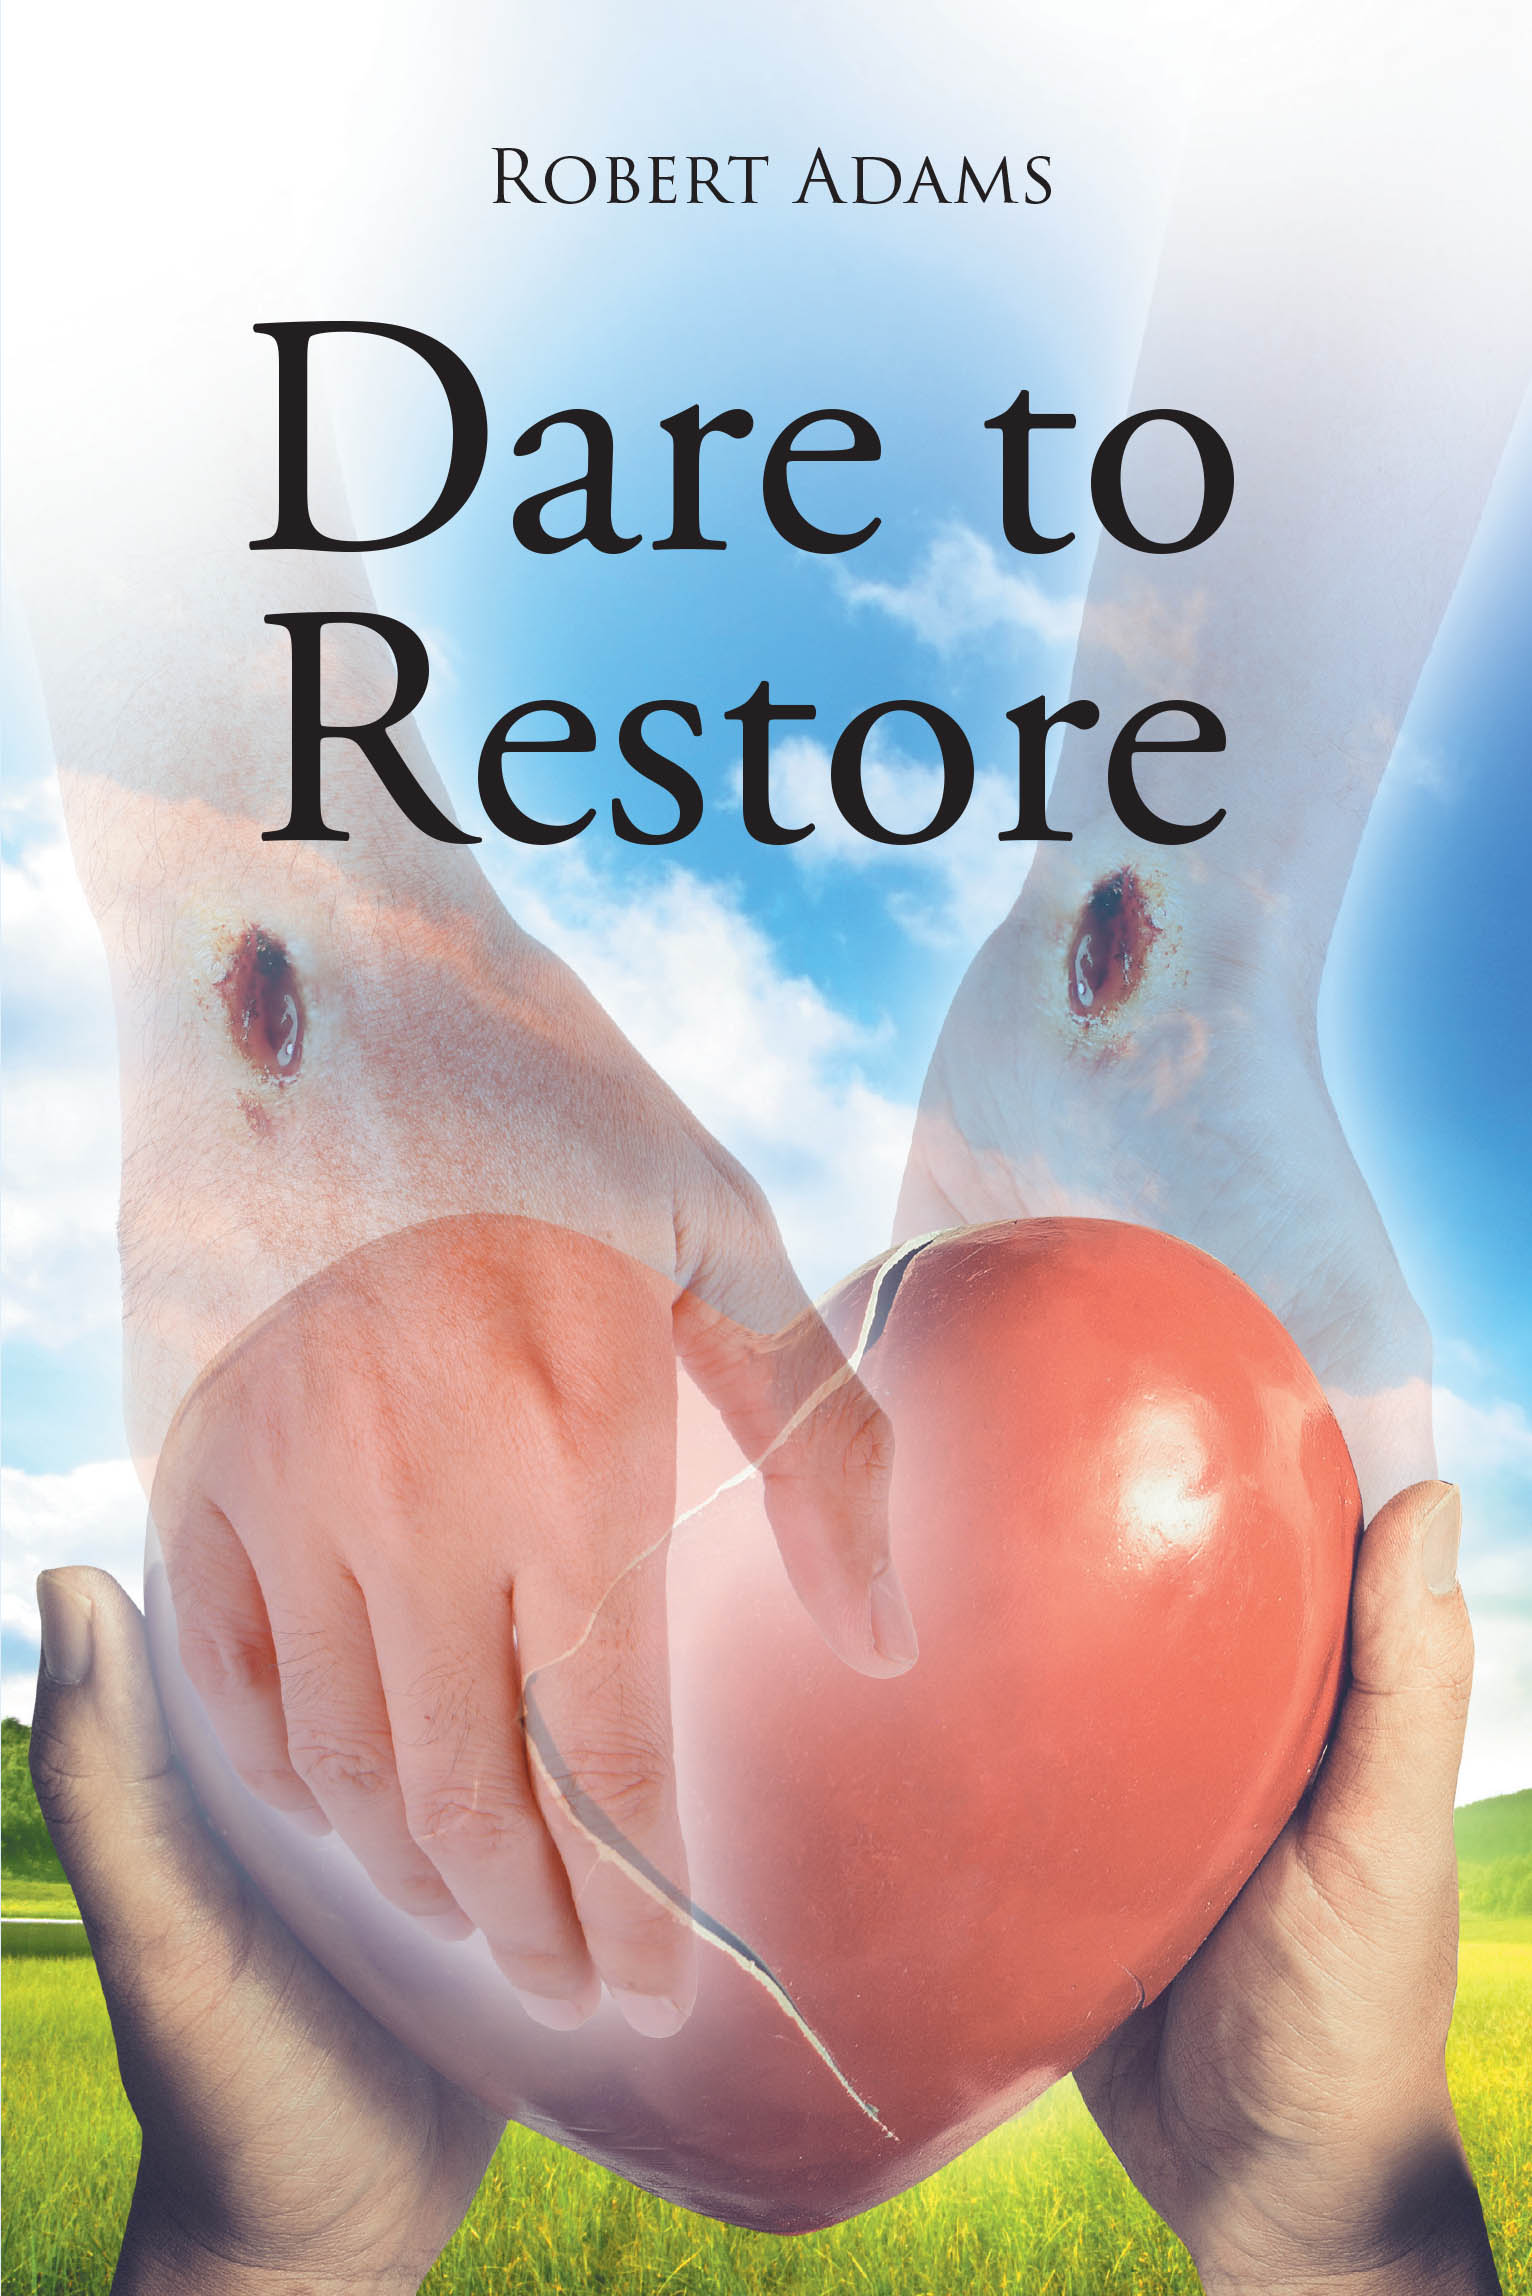 Author Robert Adams’s New Book, "Dare to Restore," is a Poignant Look at How Those Who Feel Fallen Are Often Met with Inadequate Help & How That Can Change